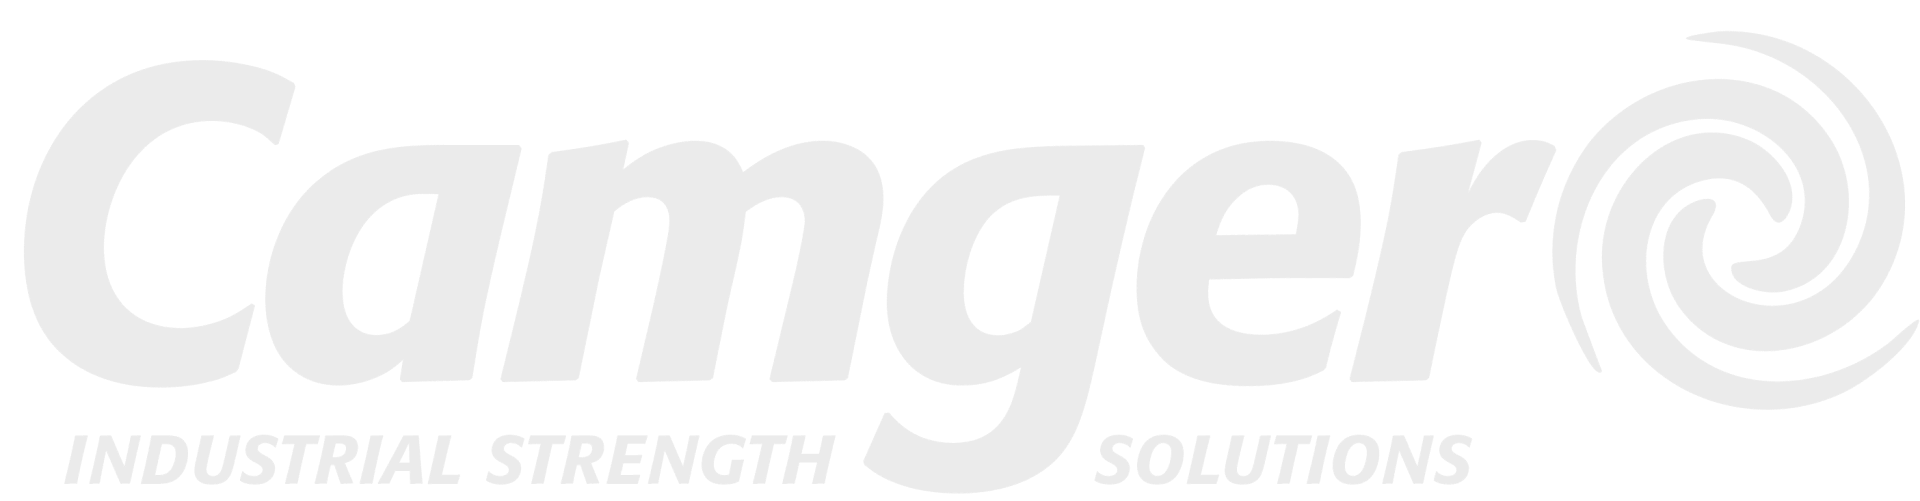 Camger - Industrial Strength Results